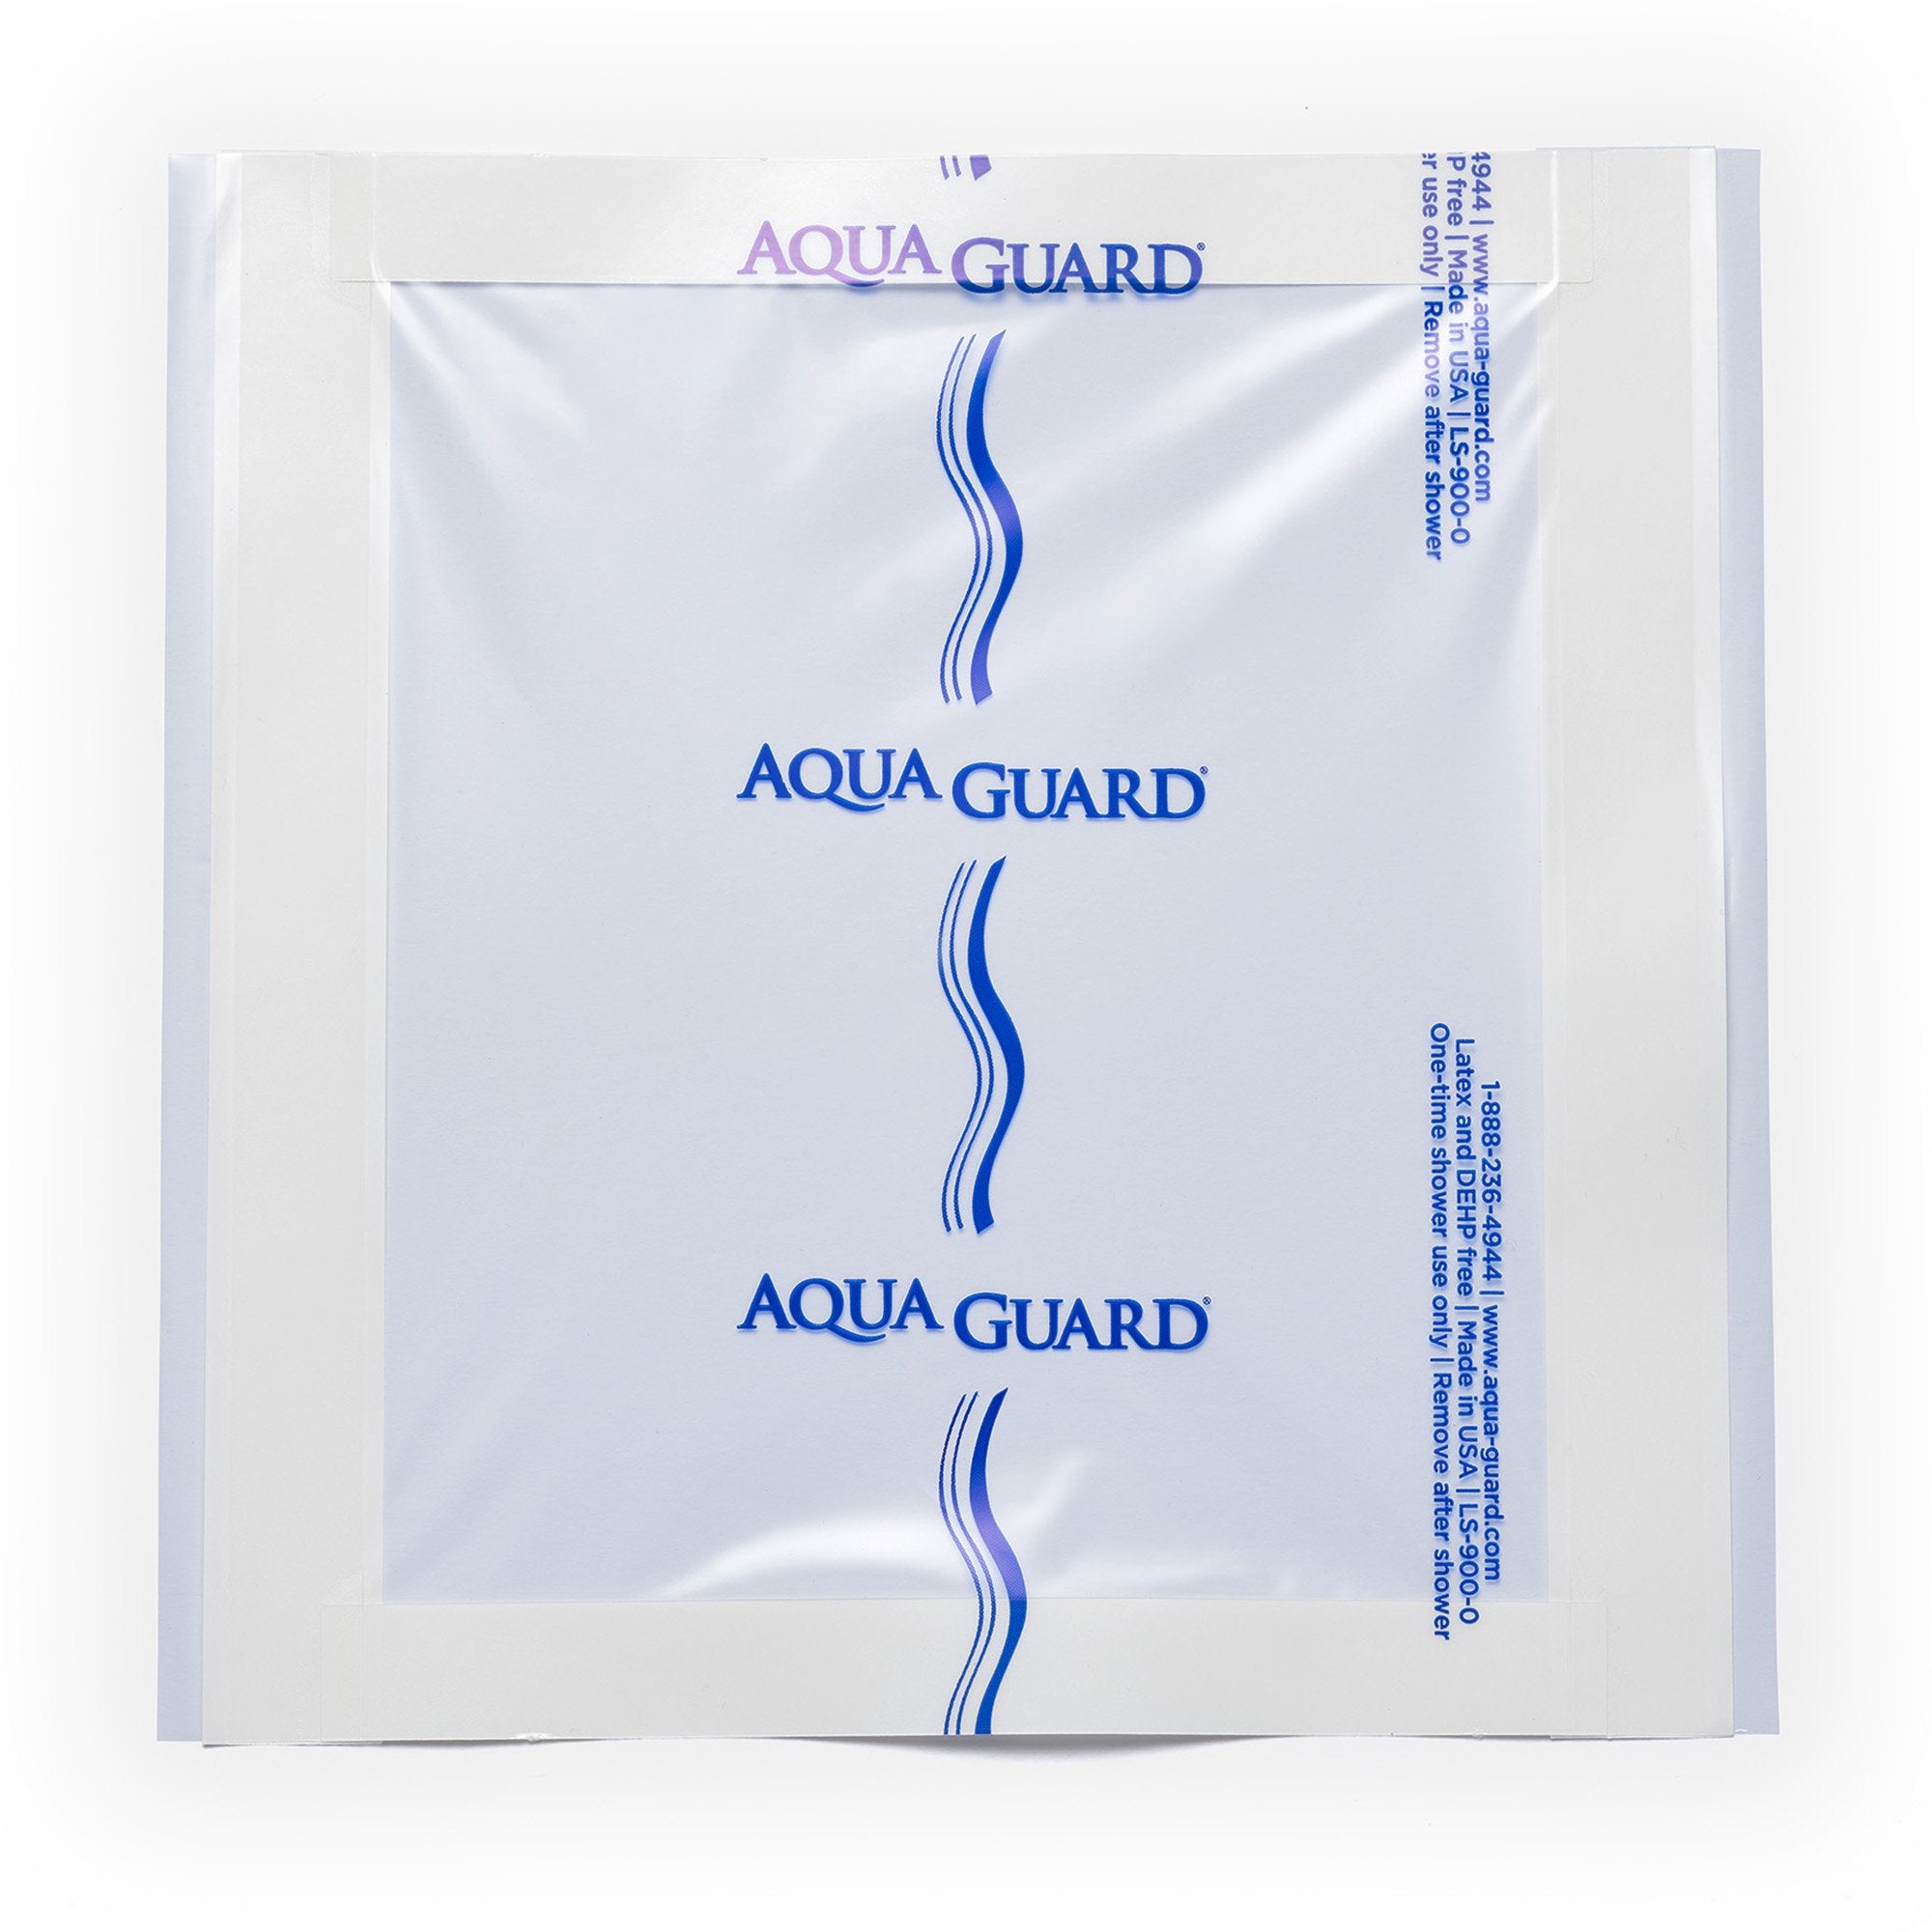 IV Site Barrier Protector AquaGuard® Shower Sheet Cover 9 X 9 Inch